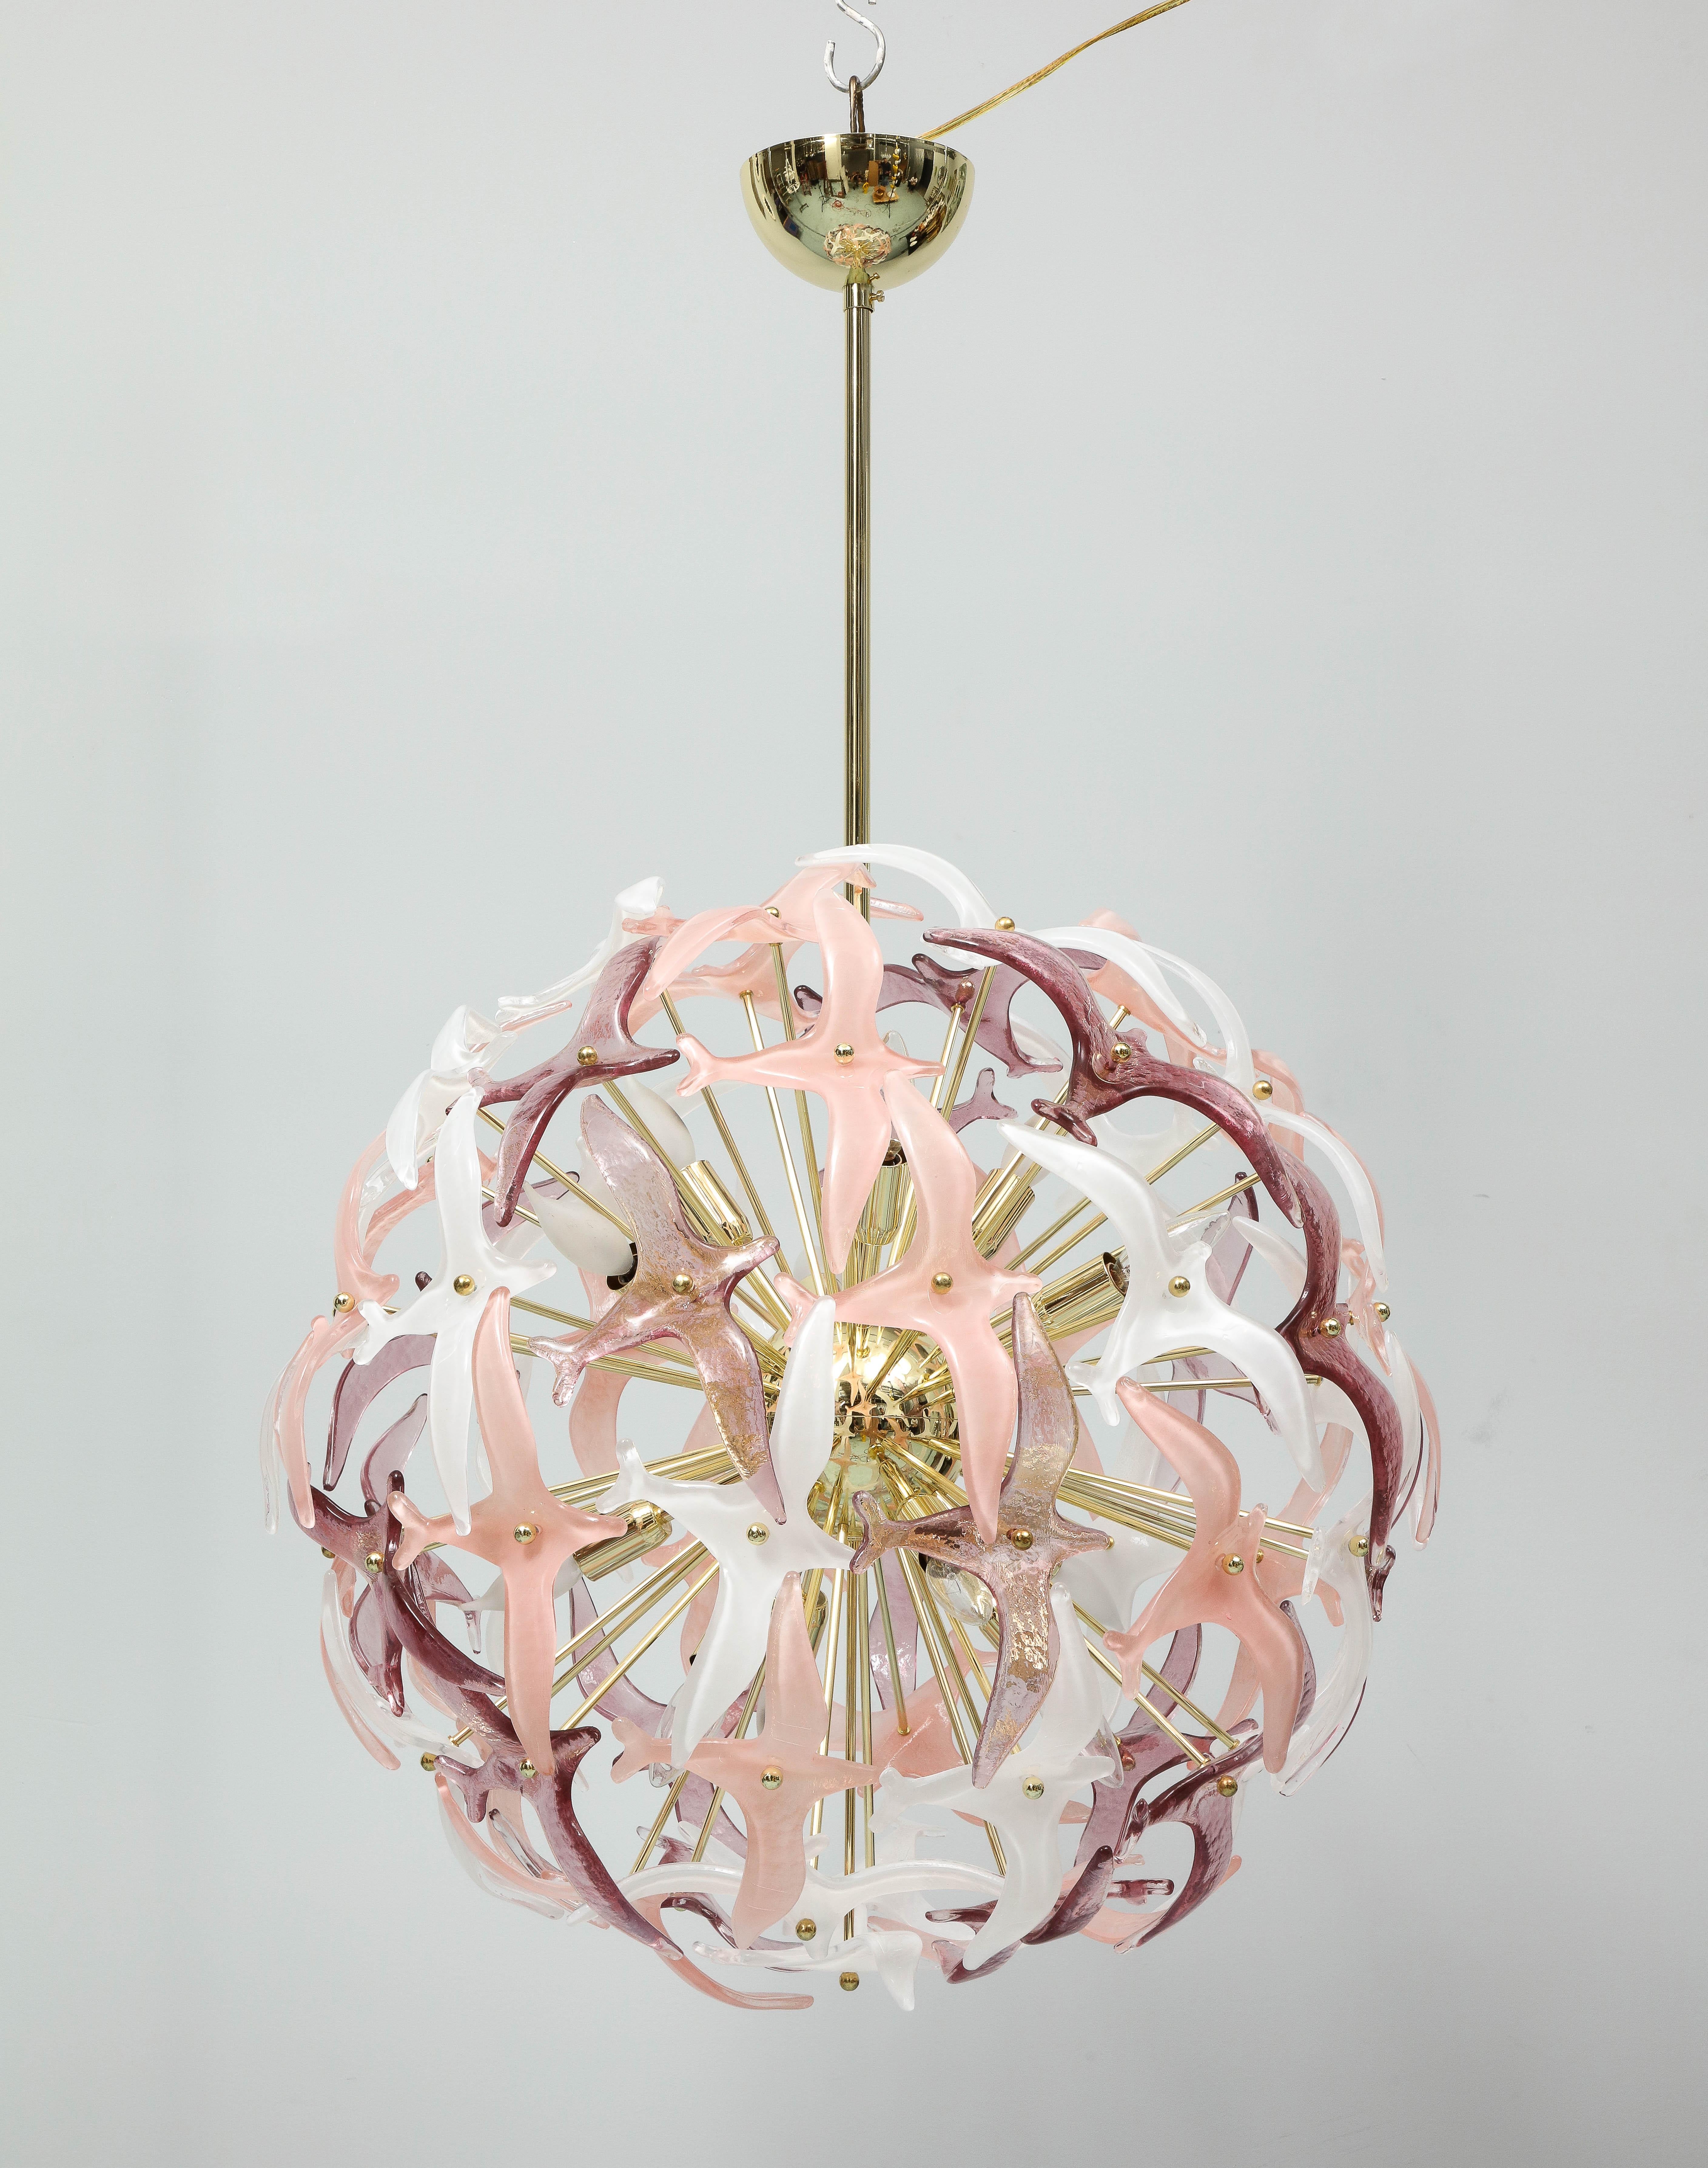 Sputnik Italian Chandelier With Pink And Beige Glass Wings In Excellent Condition For Sale In Jersey City, NJ